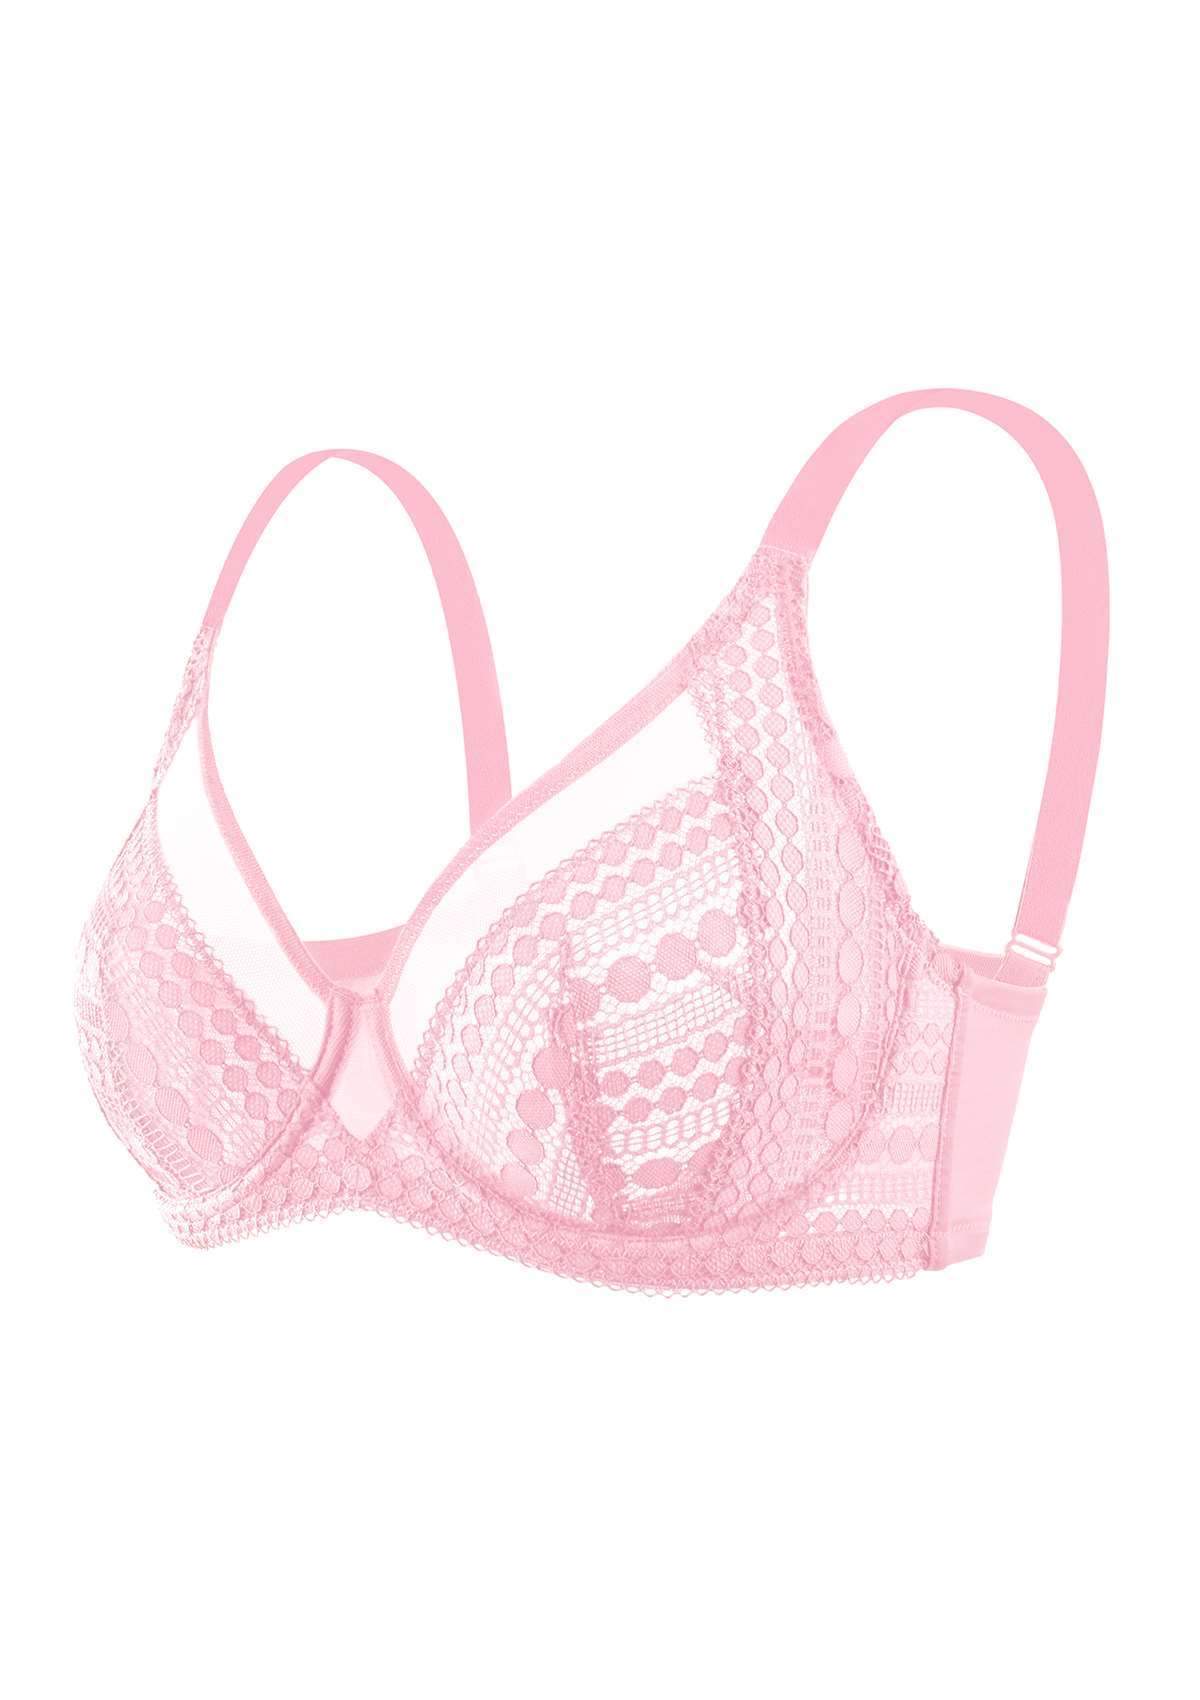 HSIA Heroine Lace Bra And Panties Set: Most Comfortable Supportive Bra - Pink / 44 / C